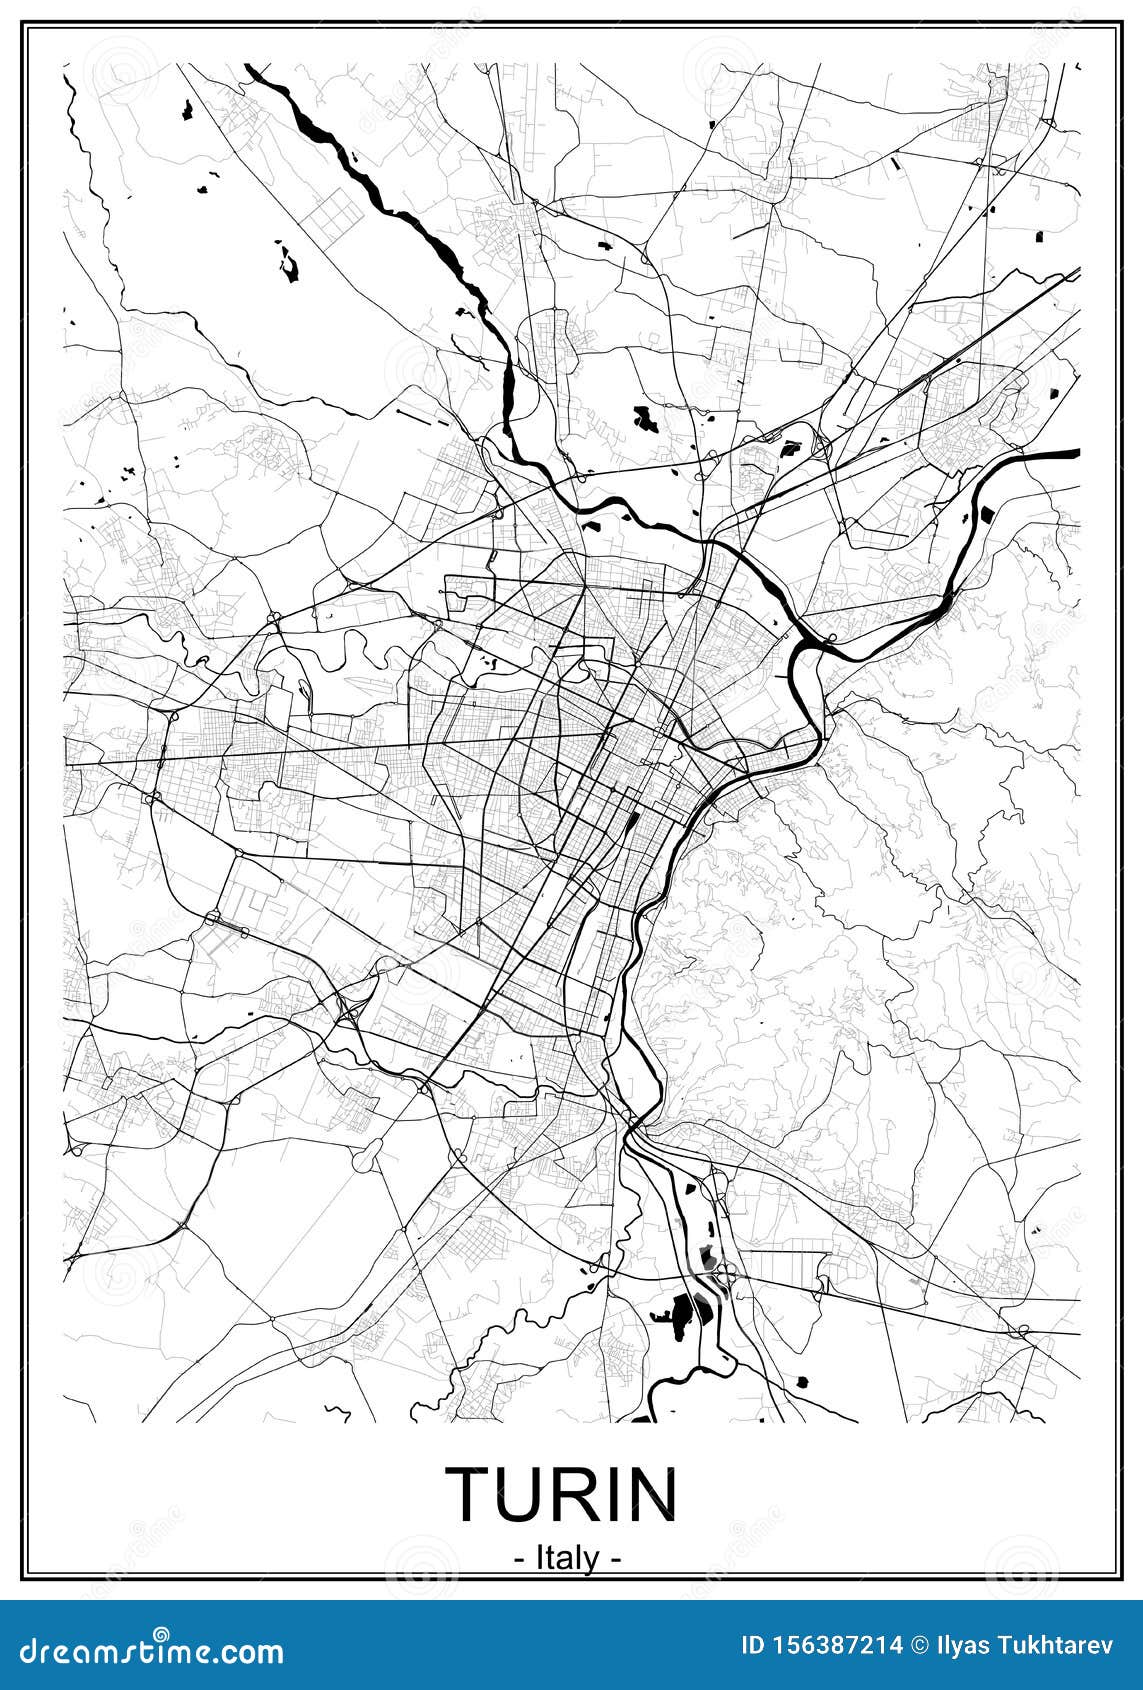 map of the city of torino, turin, italy